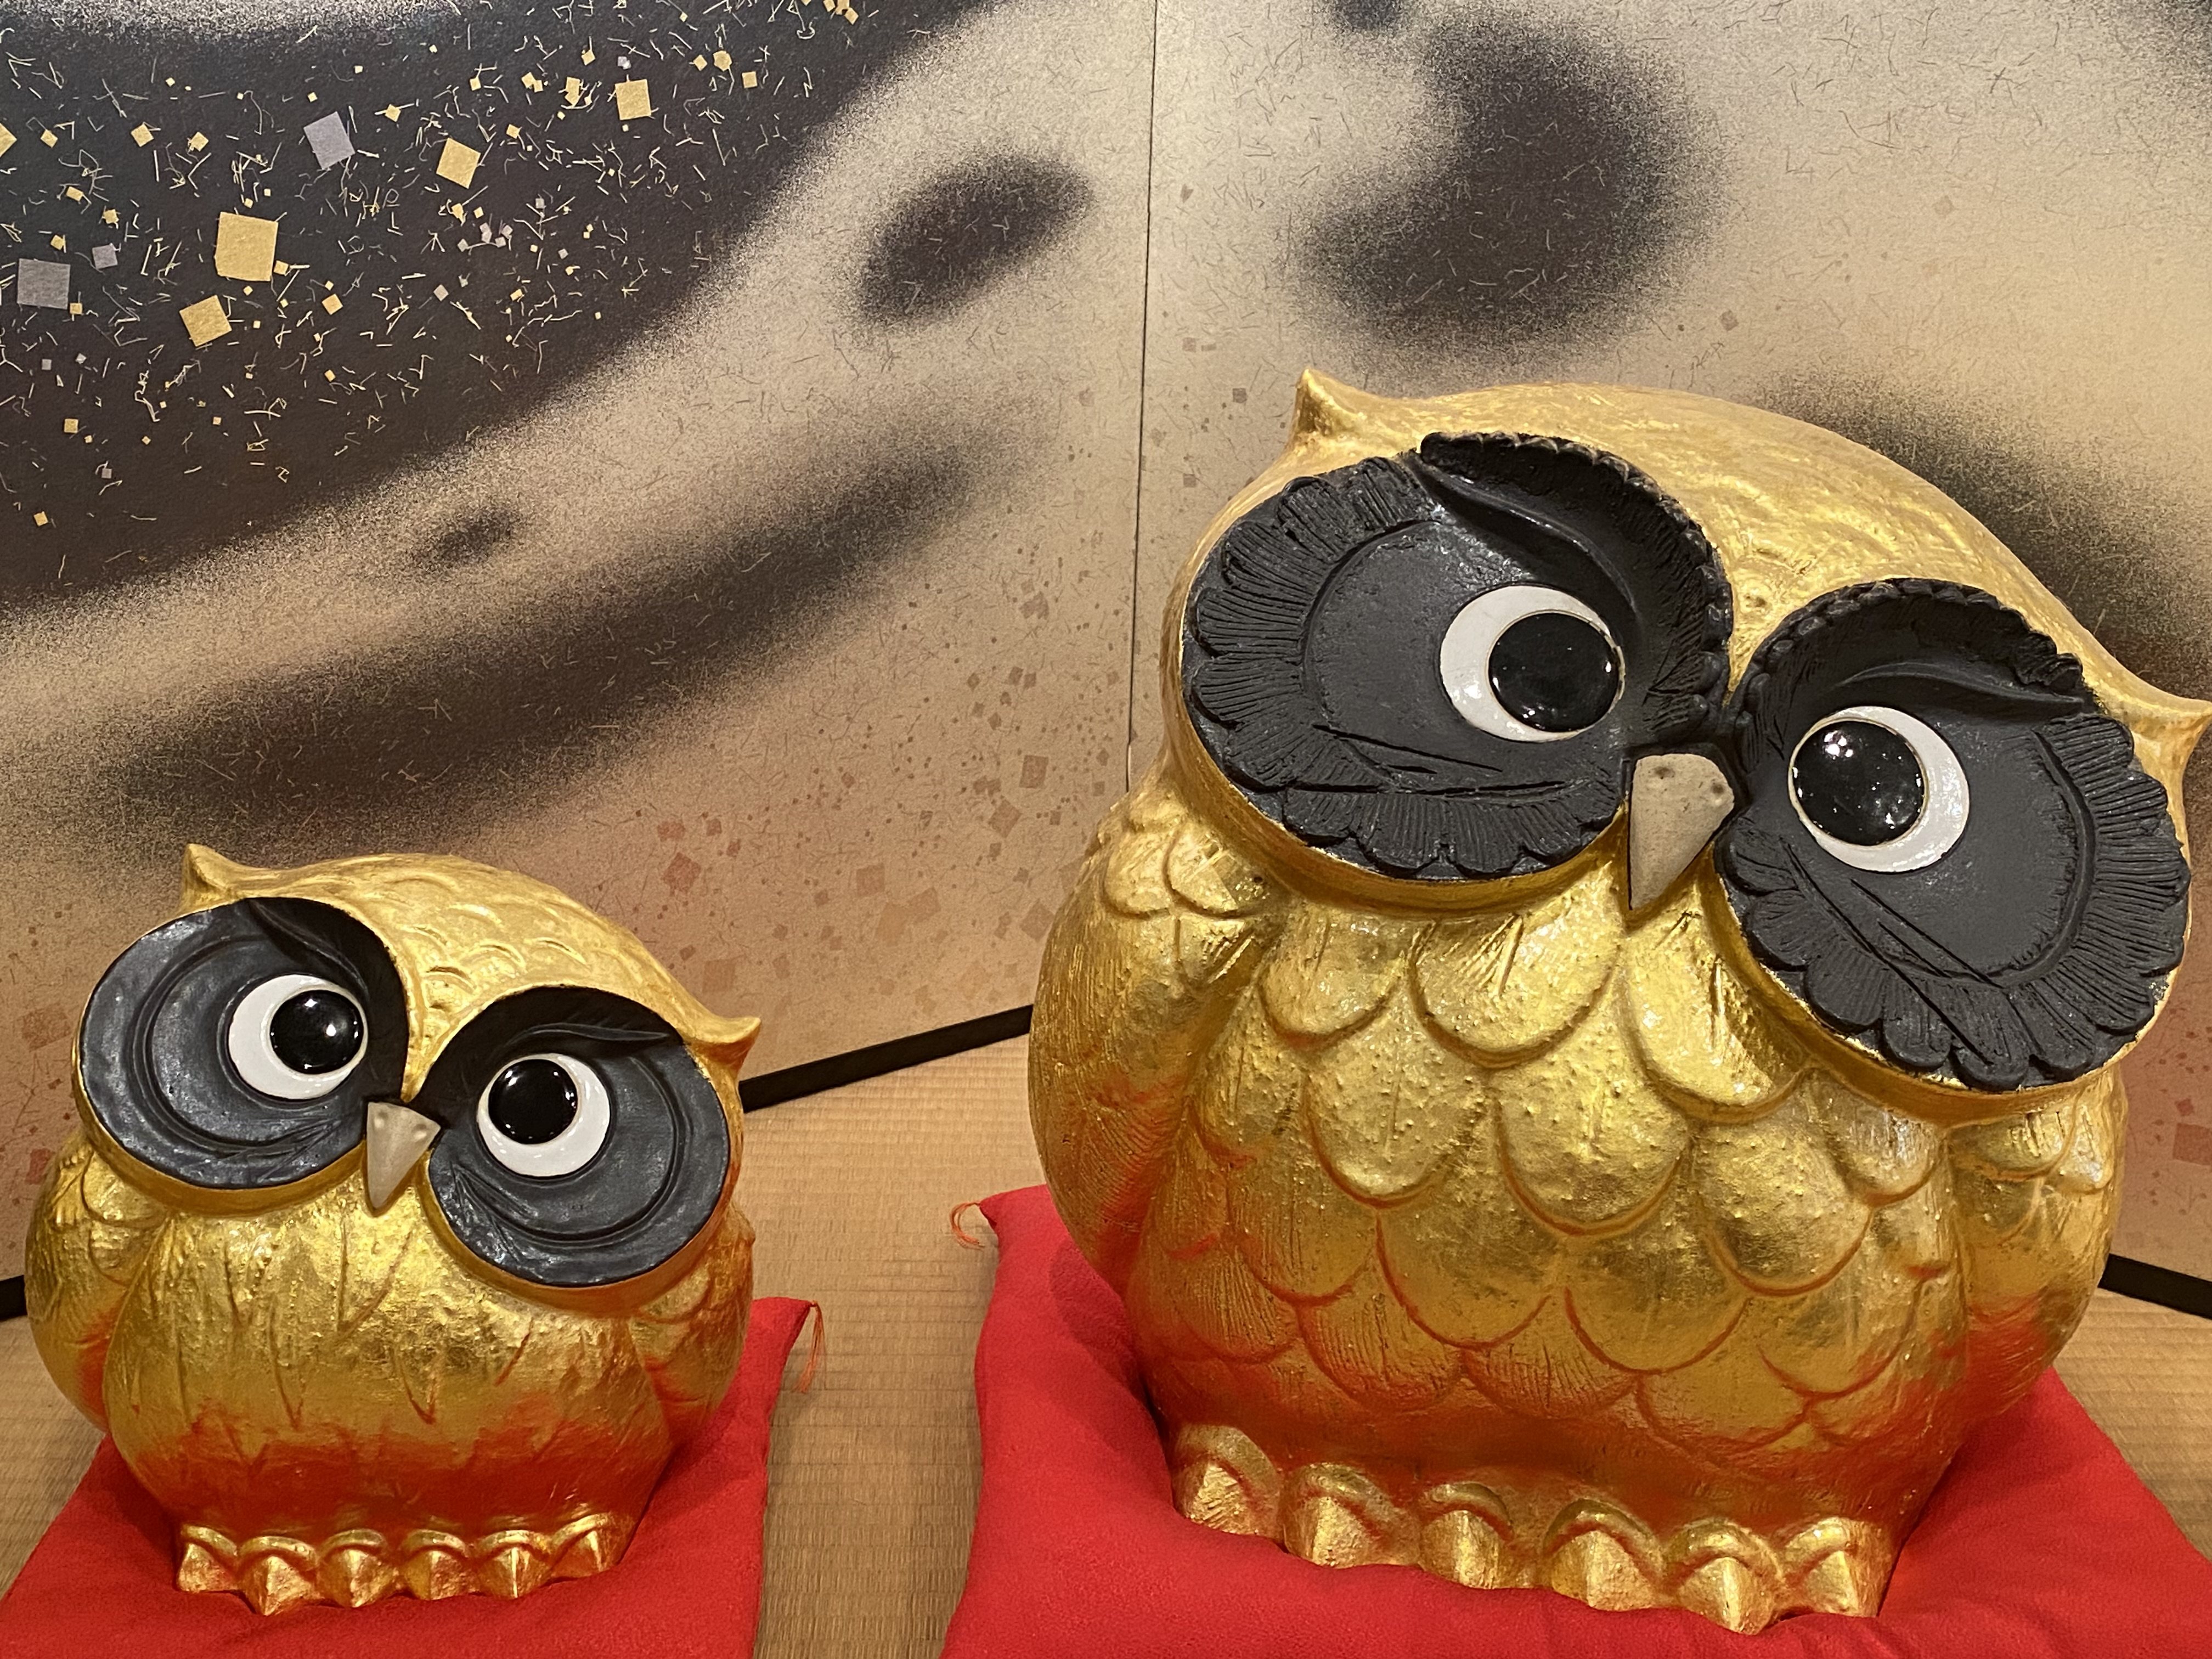 Gold plated owls at Gold Leaf Sakuda, a workshop and boutique in Kanazawa, Japan which has the city’s finest examples of gold leaf work. Photo: Tamara Hinson